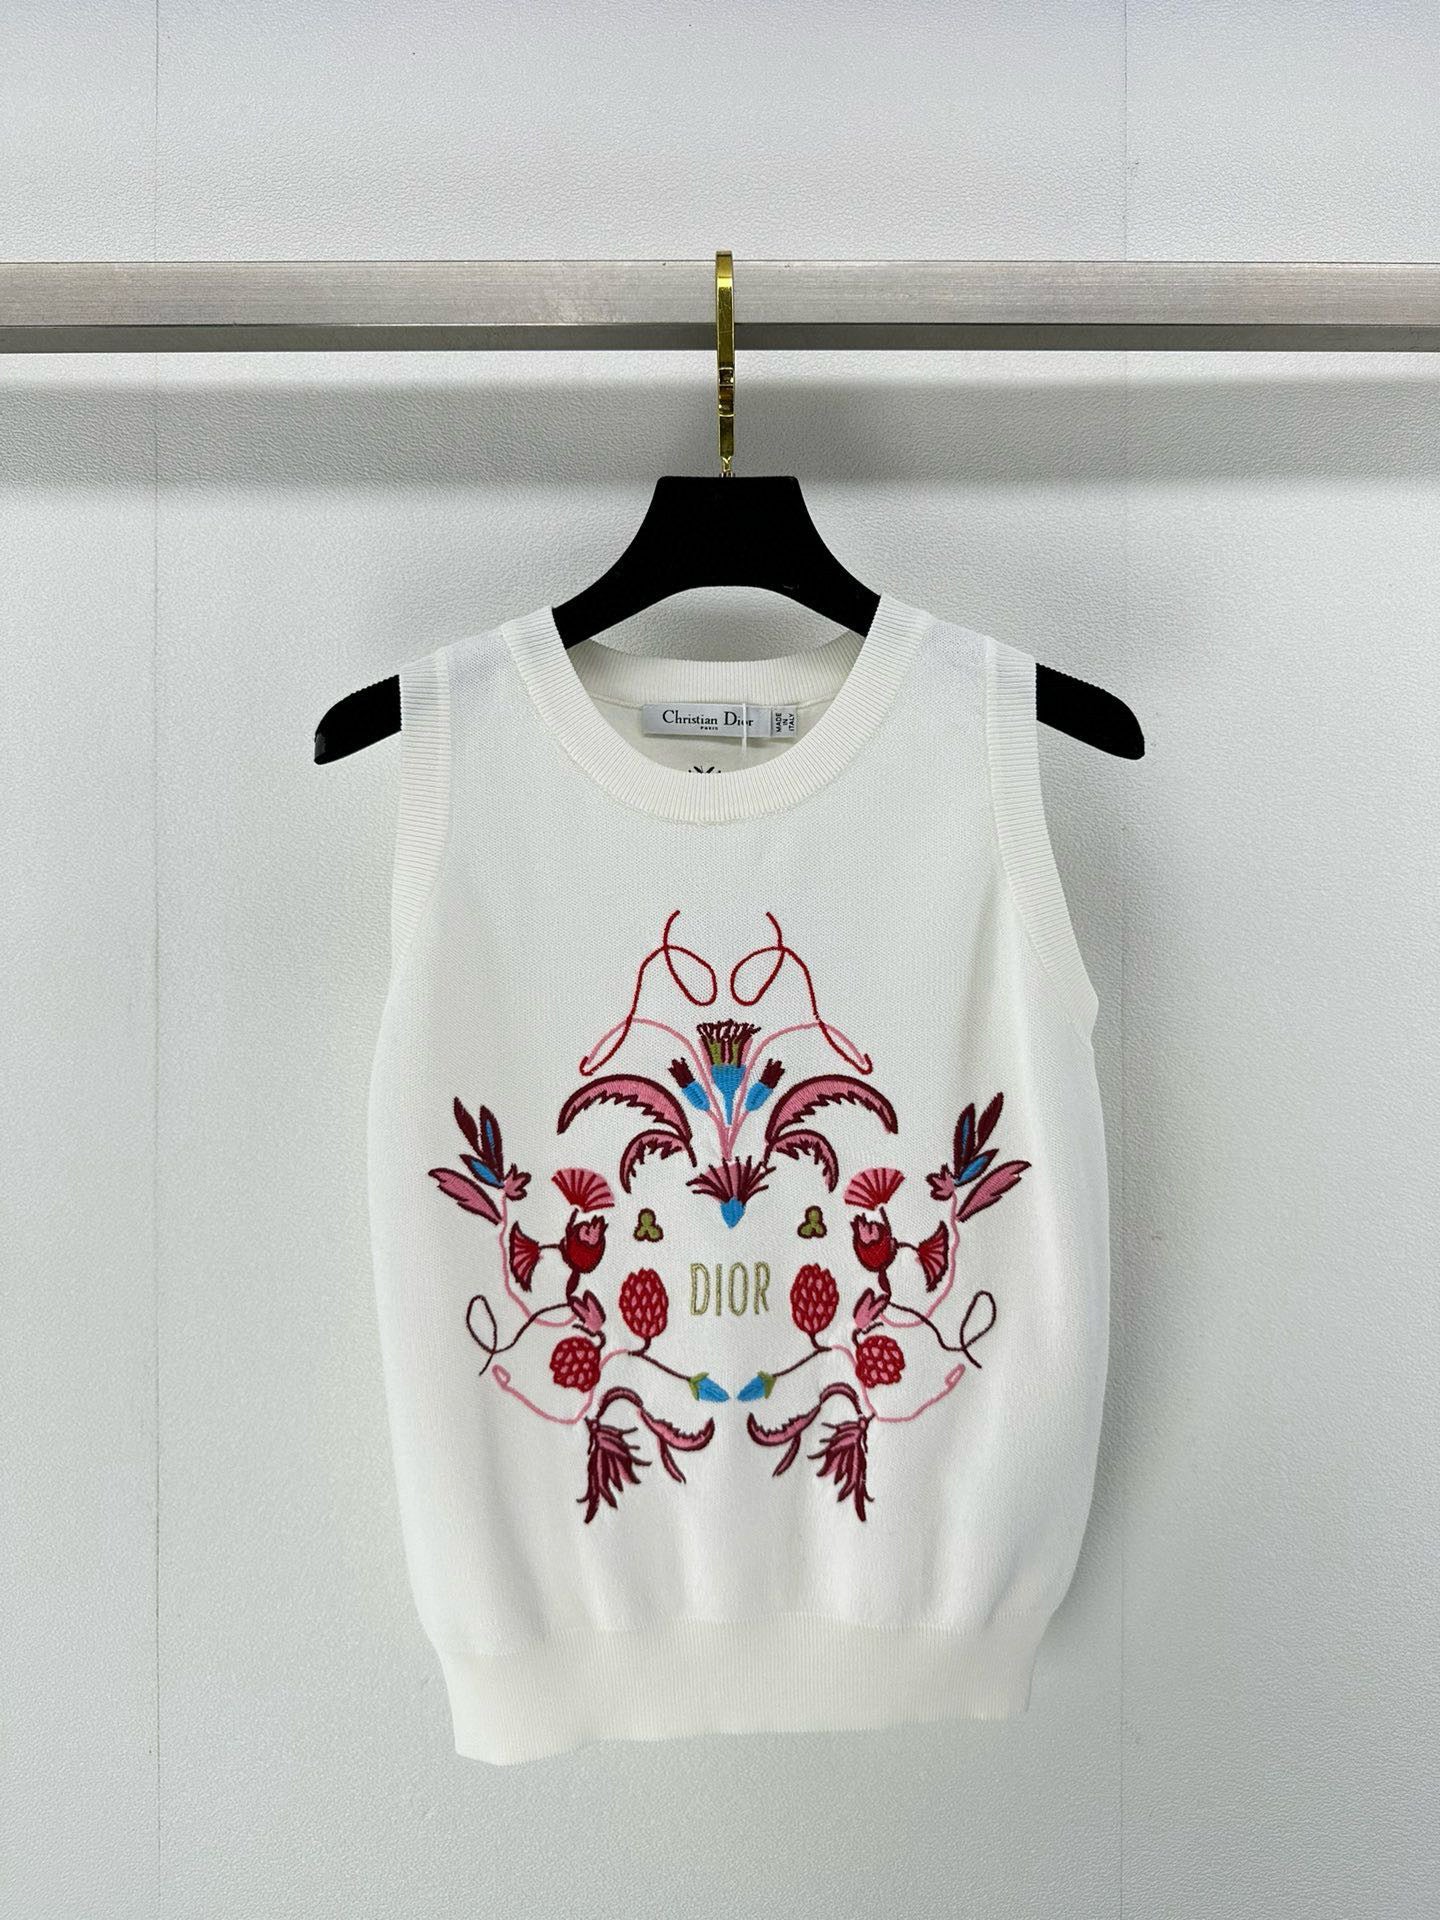 CHD sweater knitted  Embroidered Woman Limited 2 Colo'r